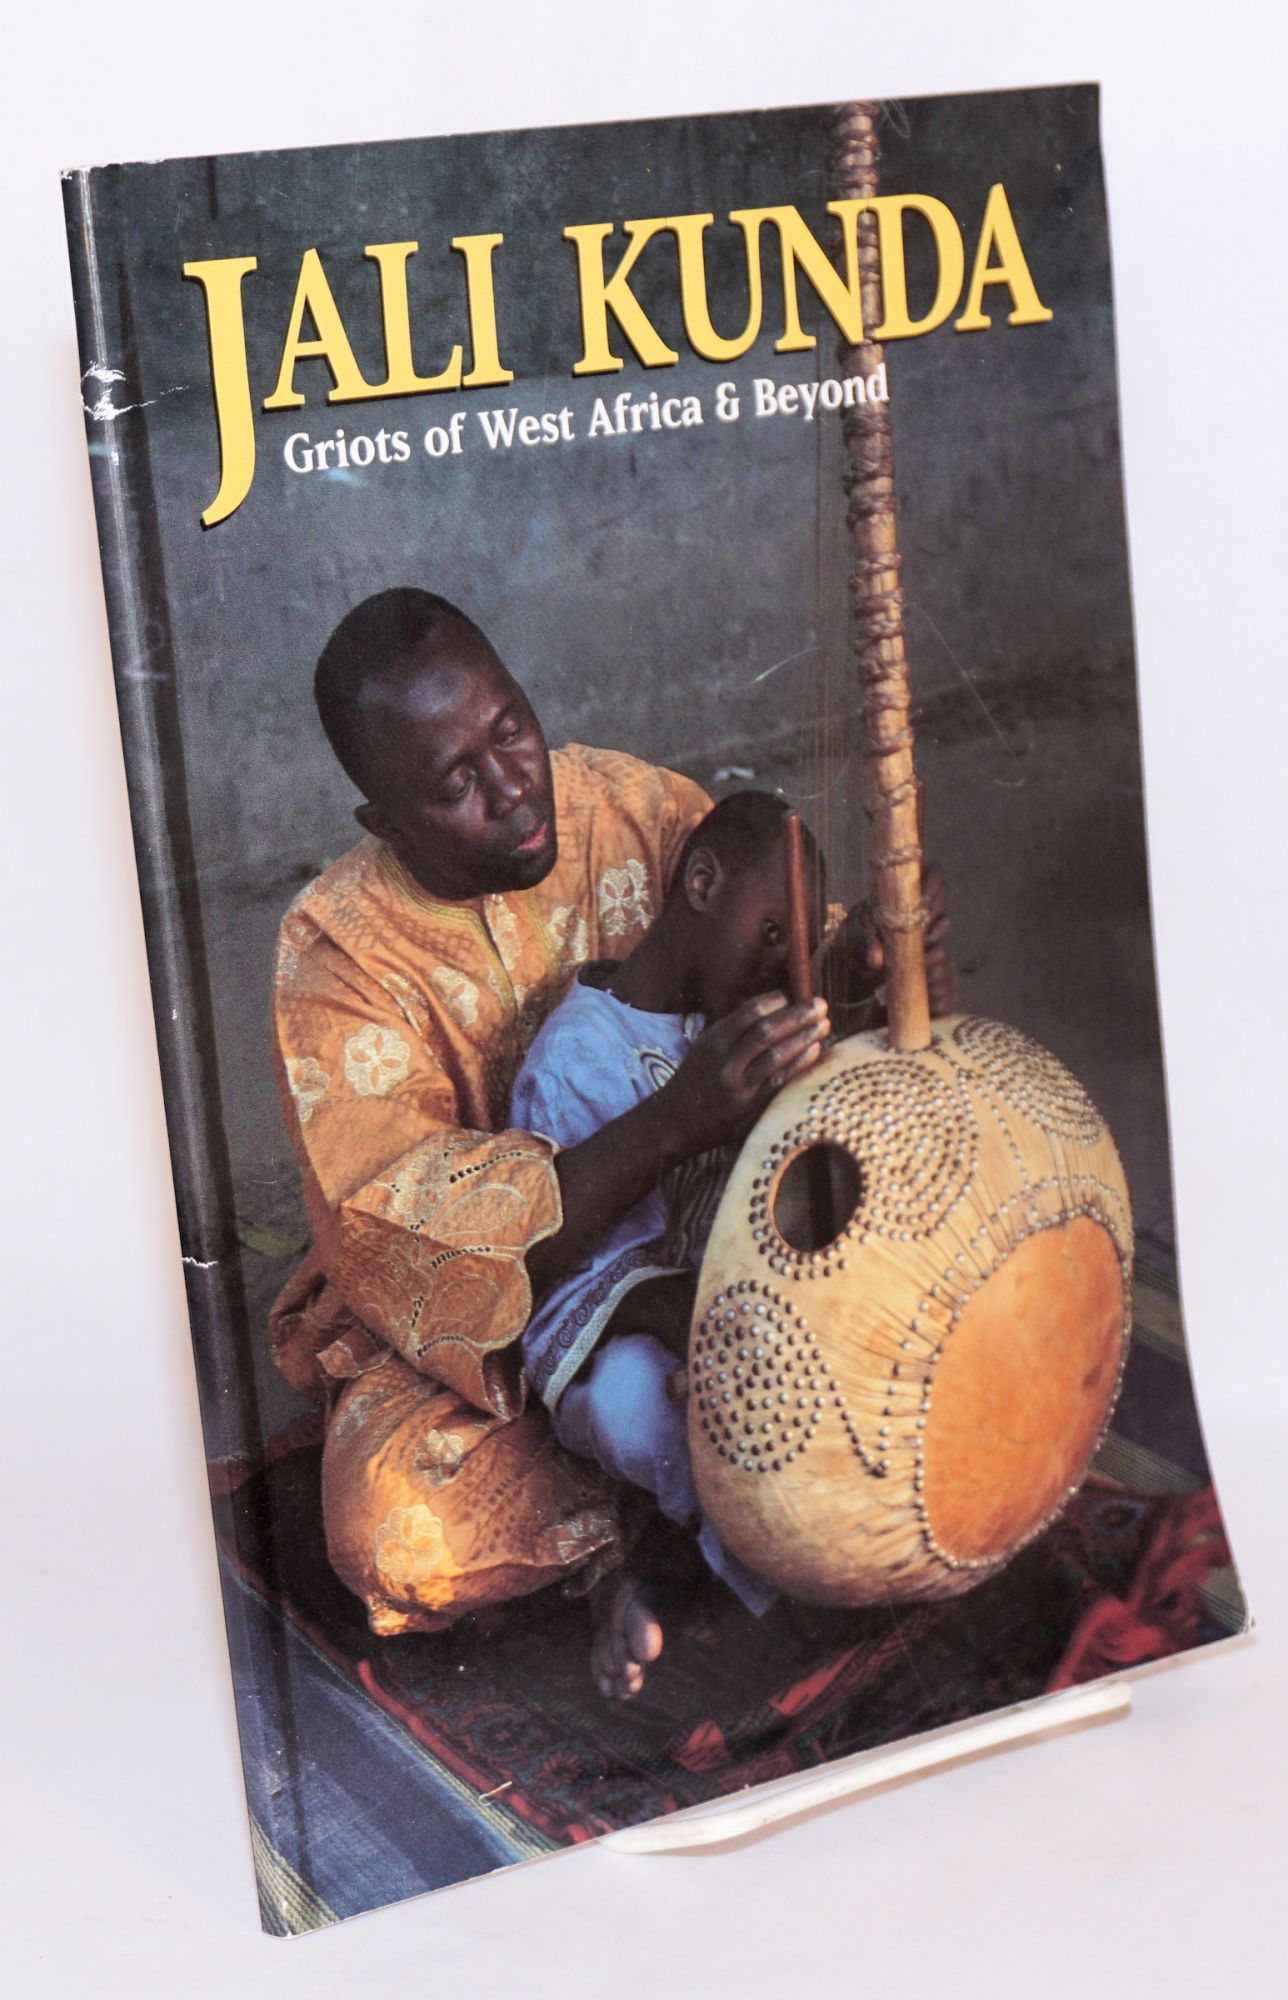 Jali Kunda: Griots of West Africa and Beyond